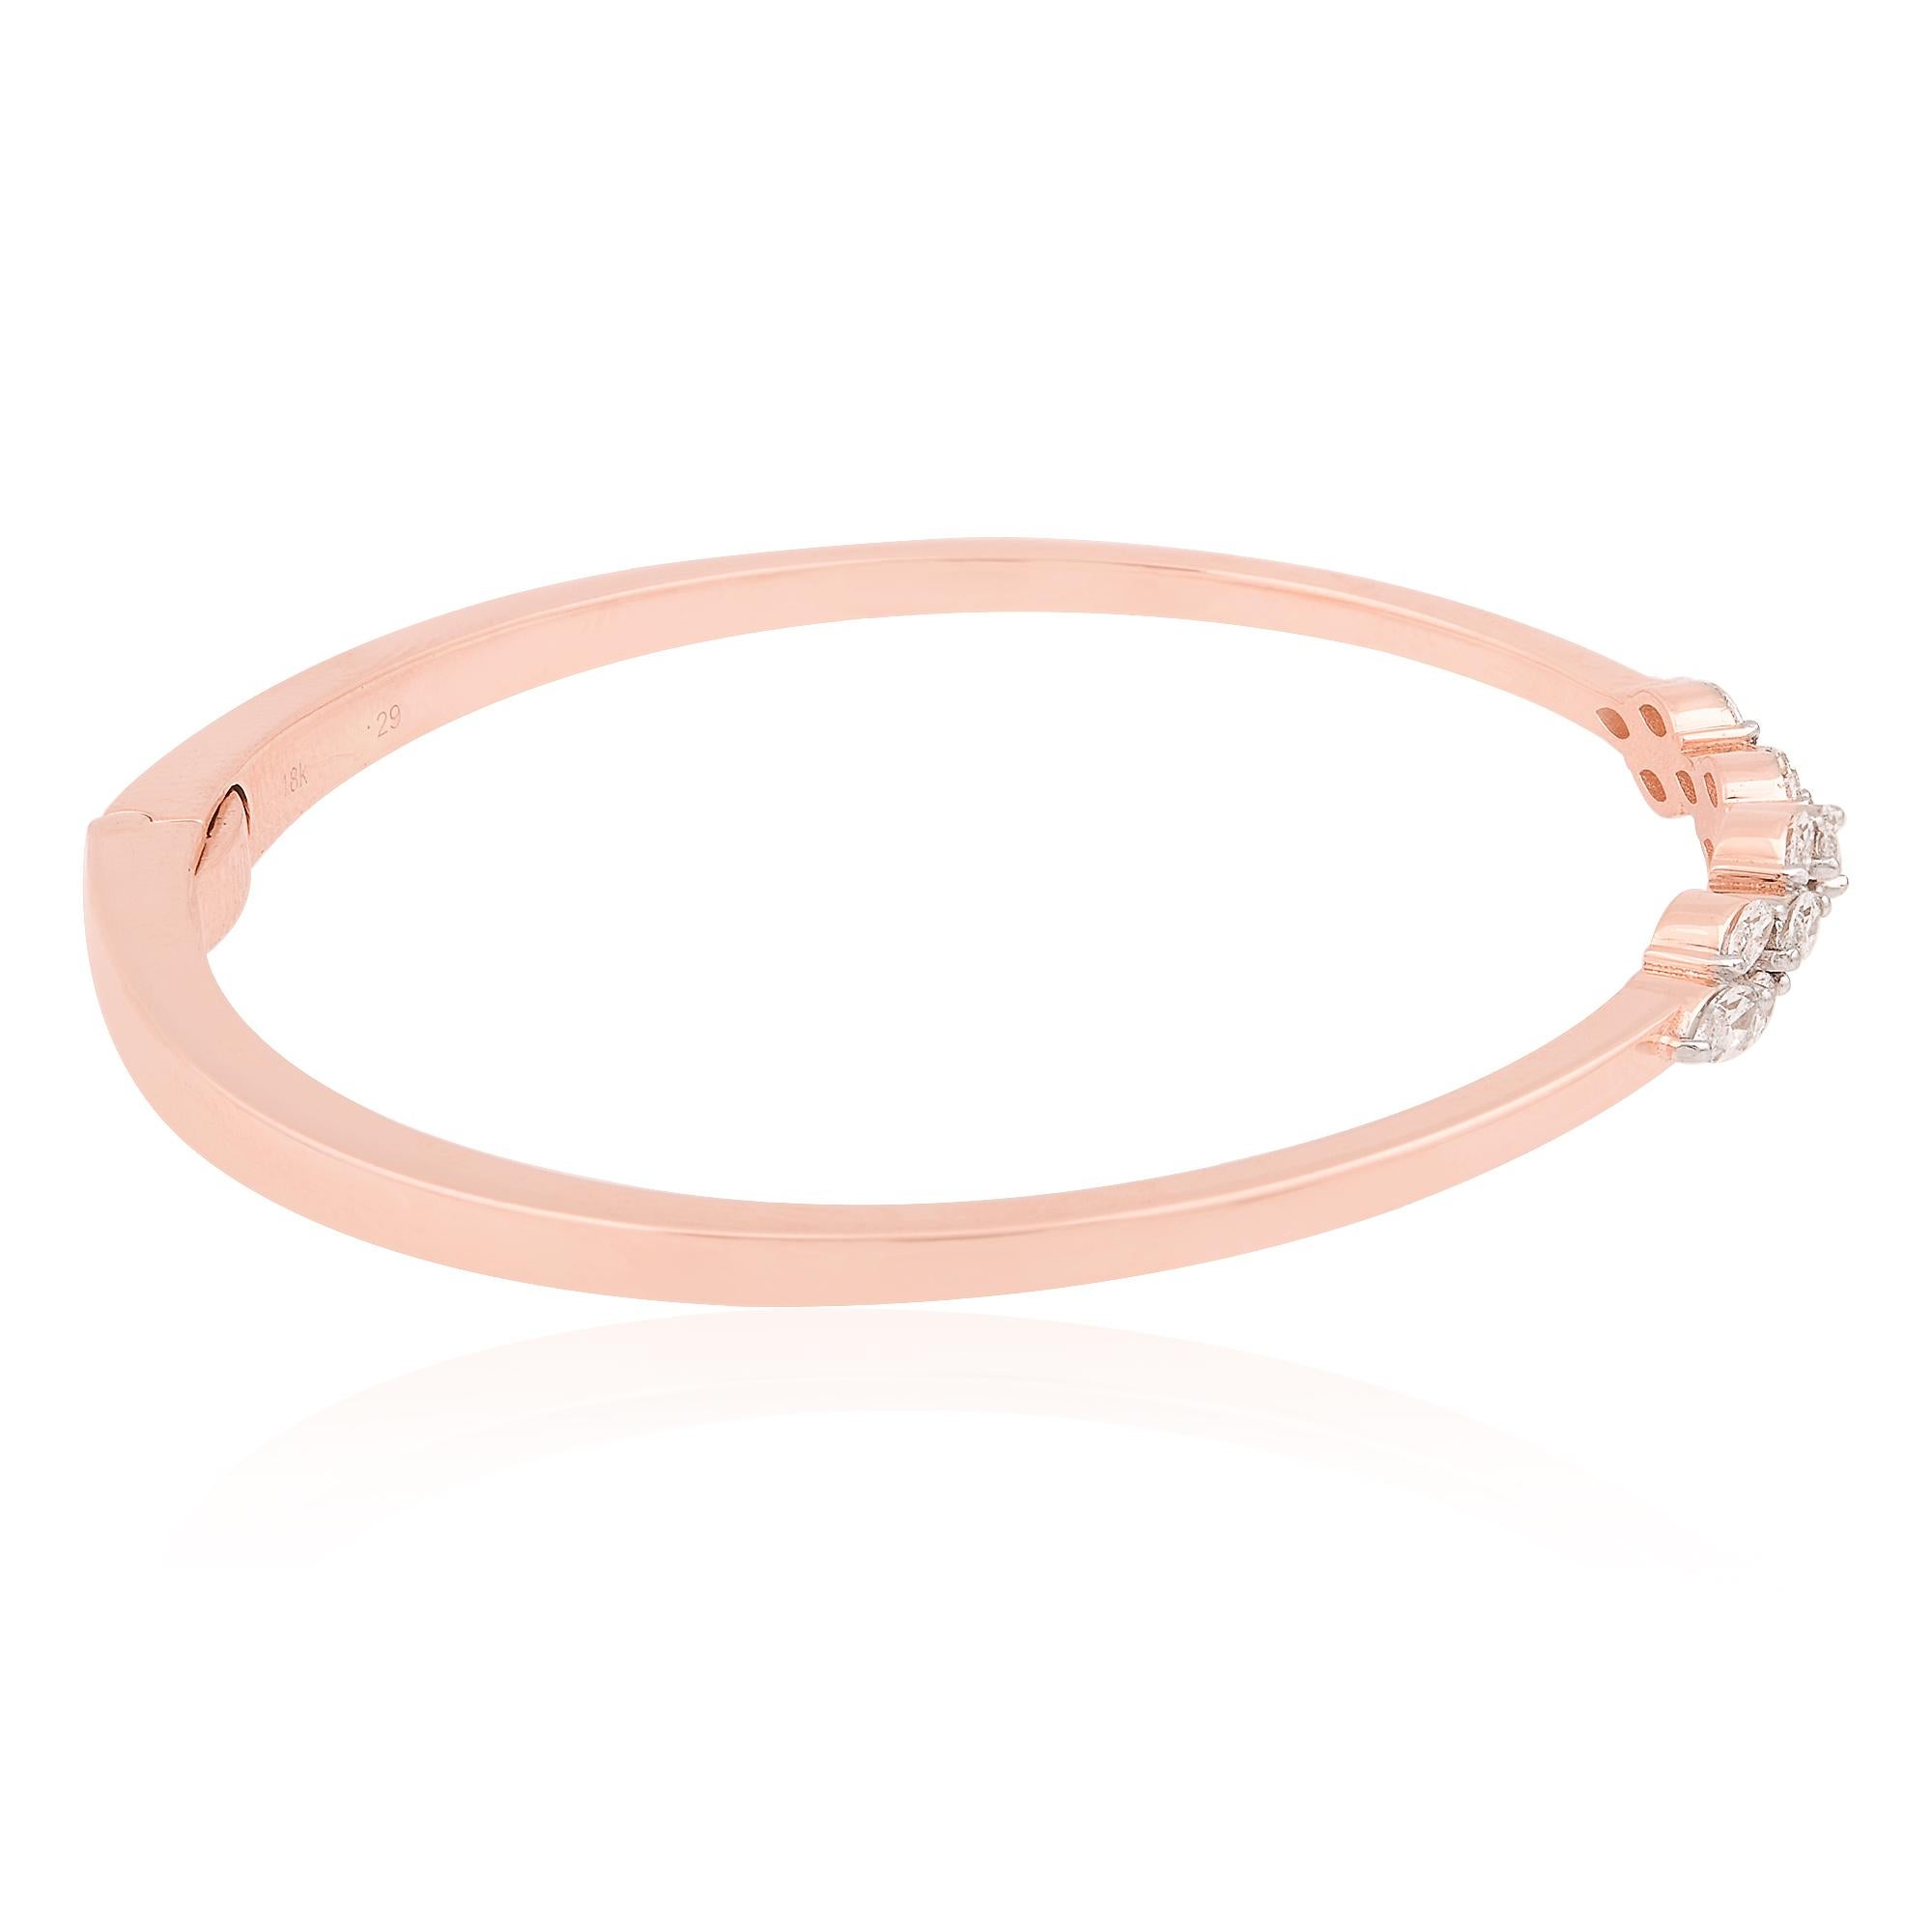 The graceful curvature of the marquise diamond is perfectly complemented by the sleek, sculptural design of the cuff bangle bracelet, expertly crafted in lustrous 18 Karat Rose Gold. The warm, rosy hue of the gold enhances the beauty of the diamond,